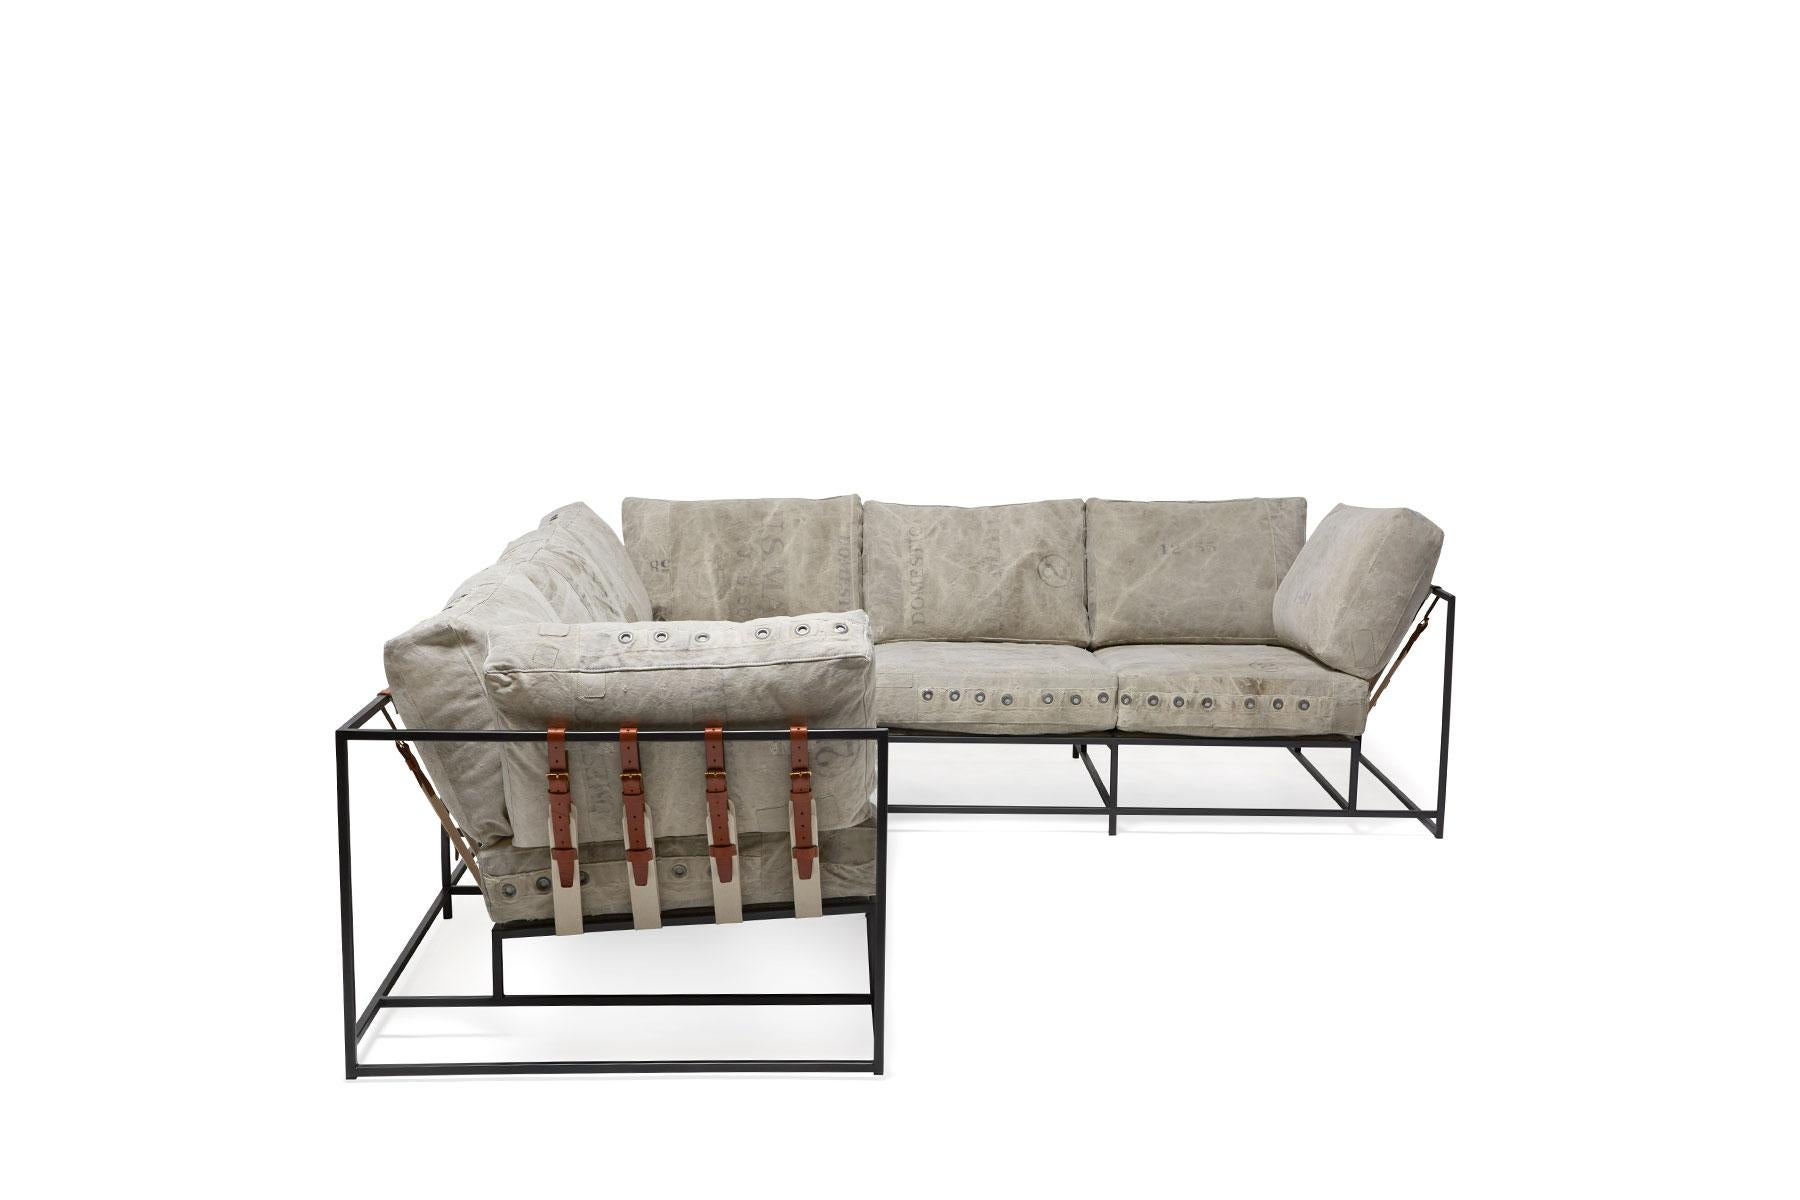 Stephen Kenn's Inheritance Collection sectionals are a great to customize your space and create the ultimate lounge environment.

Since first designing Inheritance Collection, Stephen Kenn has been inspired by the inherent history in vintage